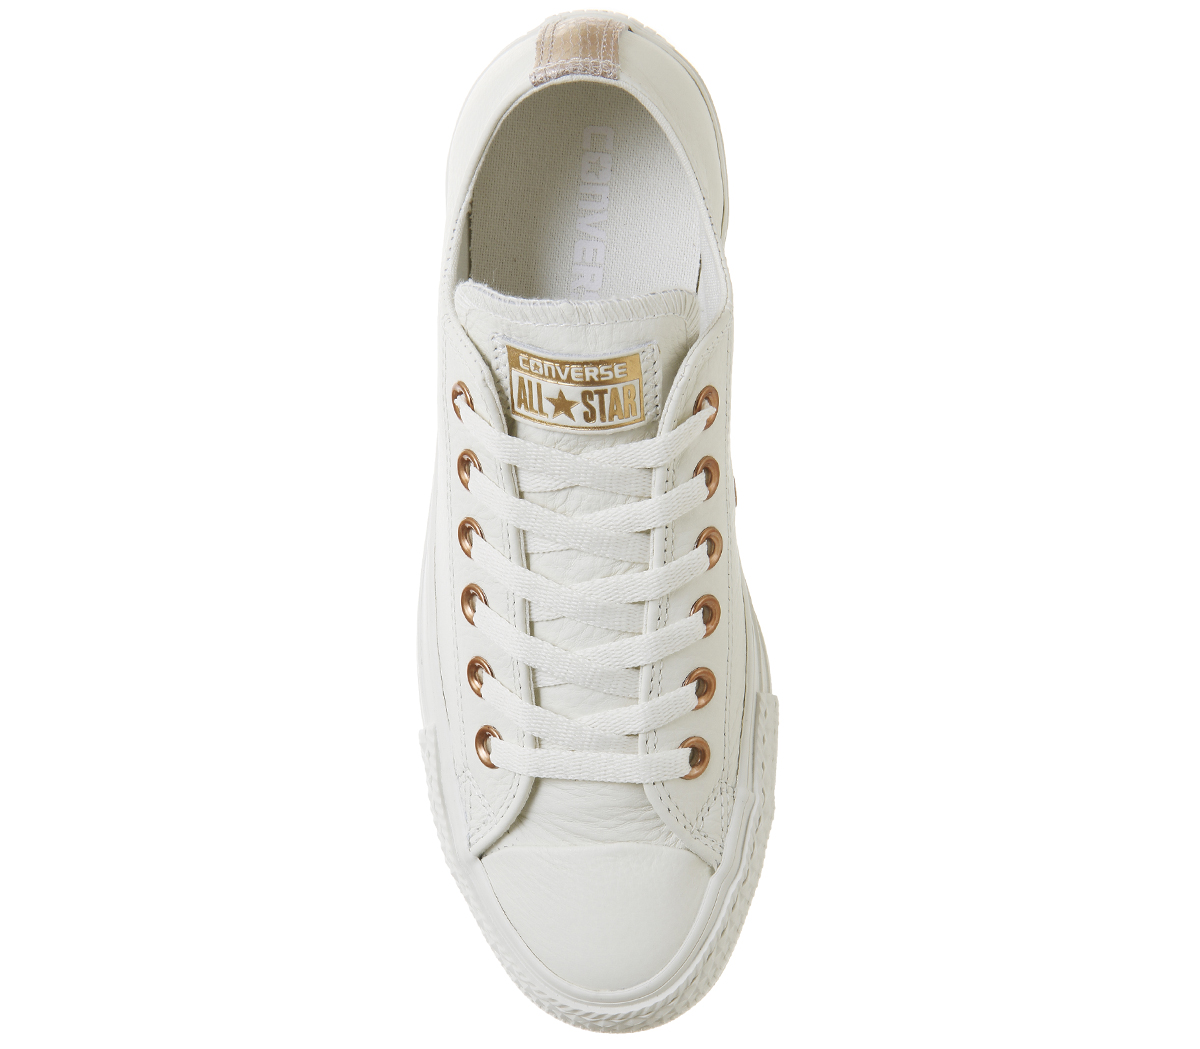 white rose gold leather converse